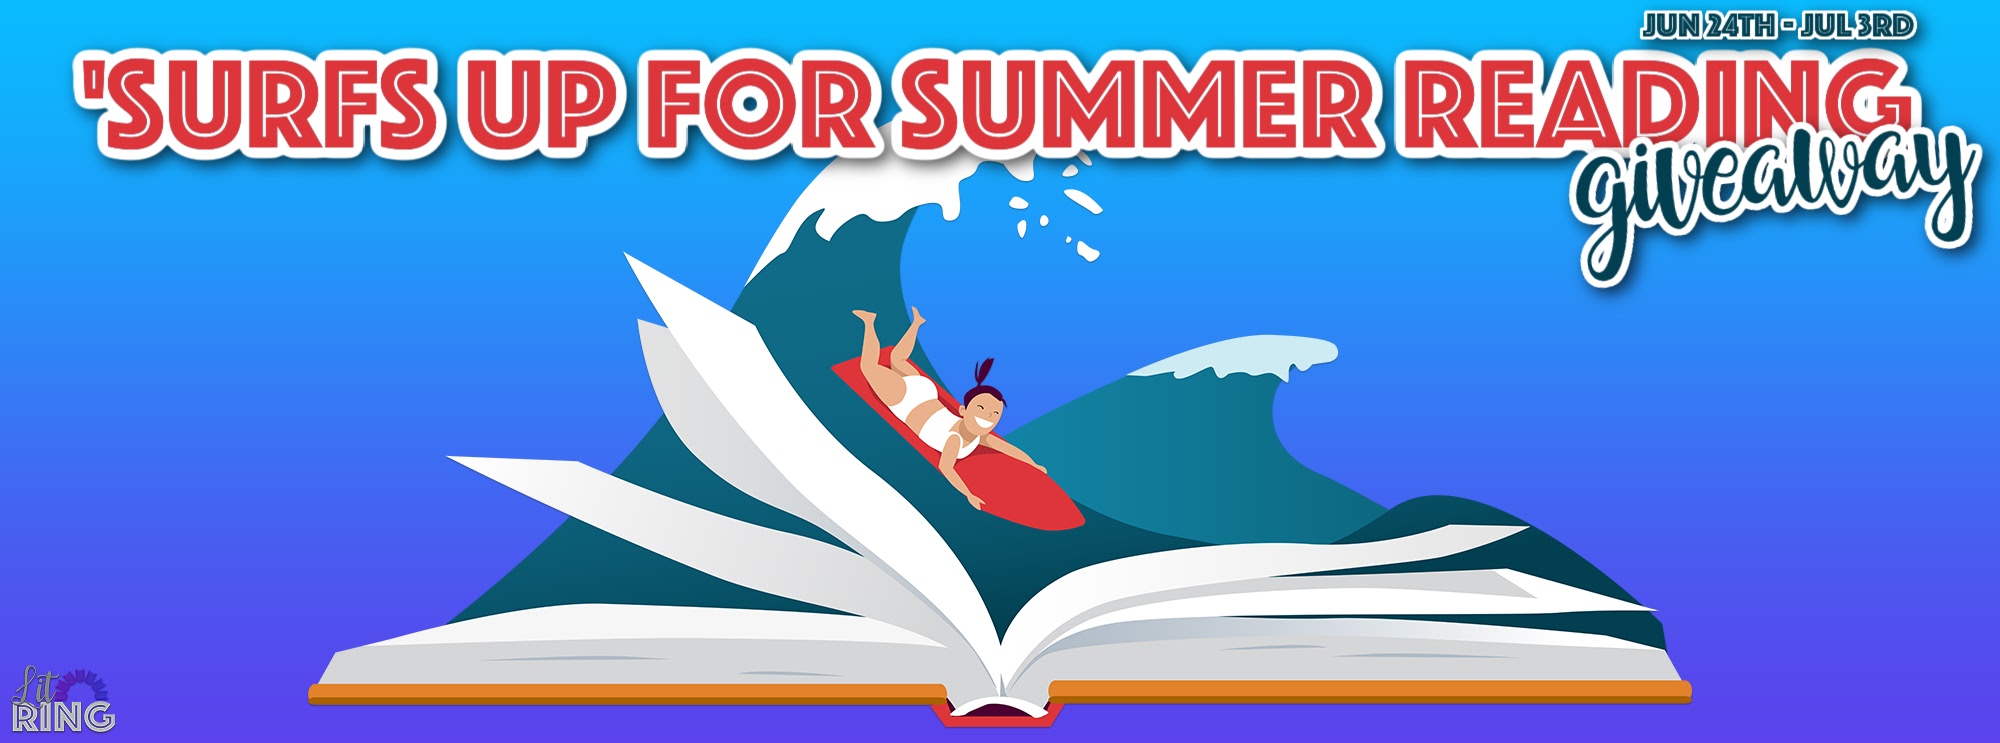 Join the Surfs Up for Summer Reading Promo from LitRing